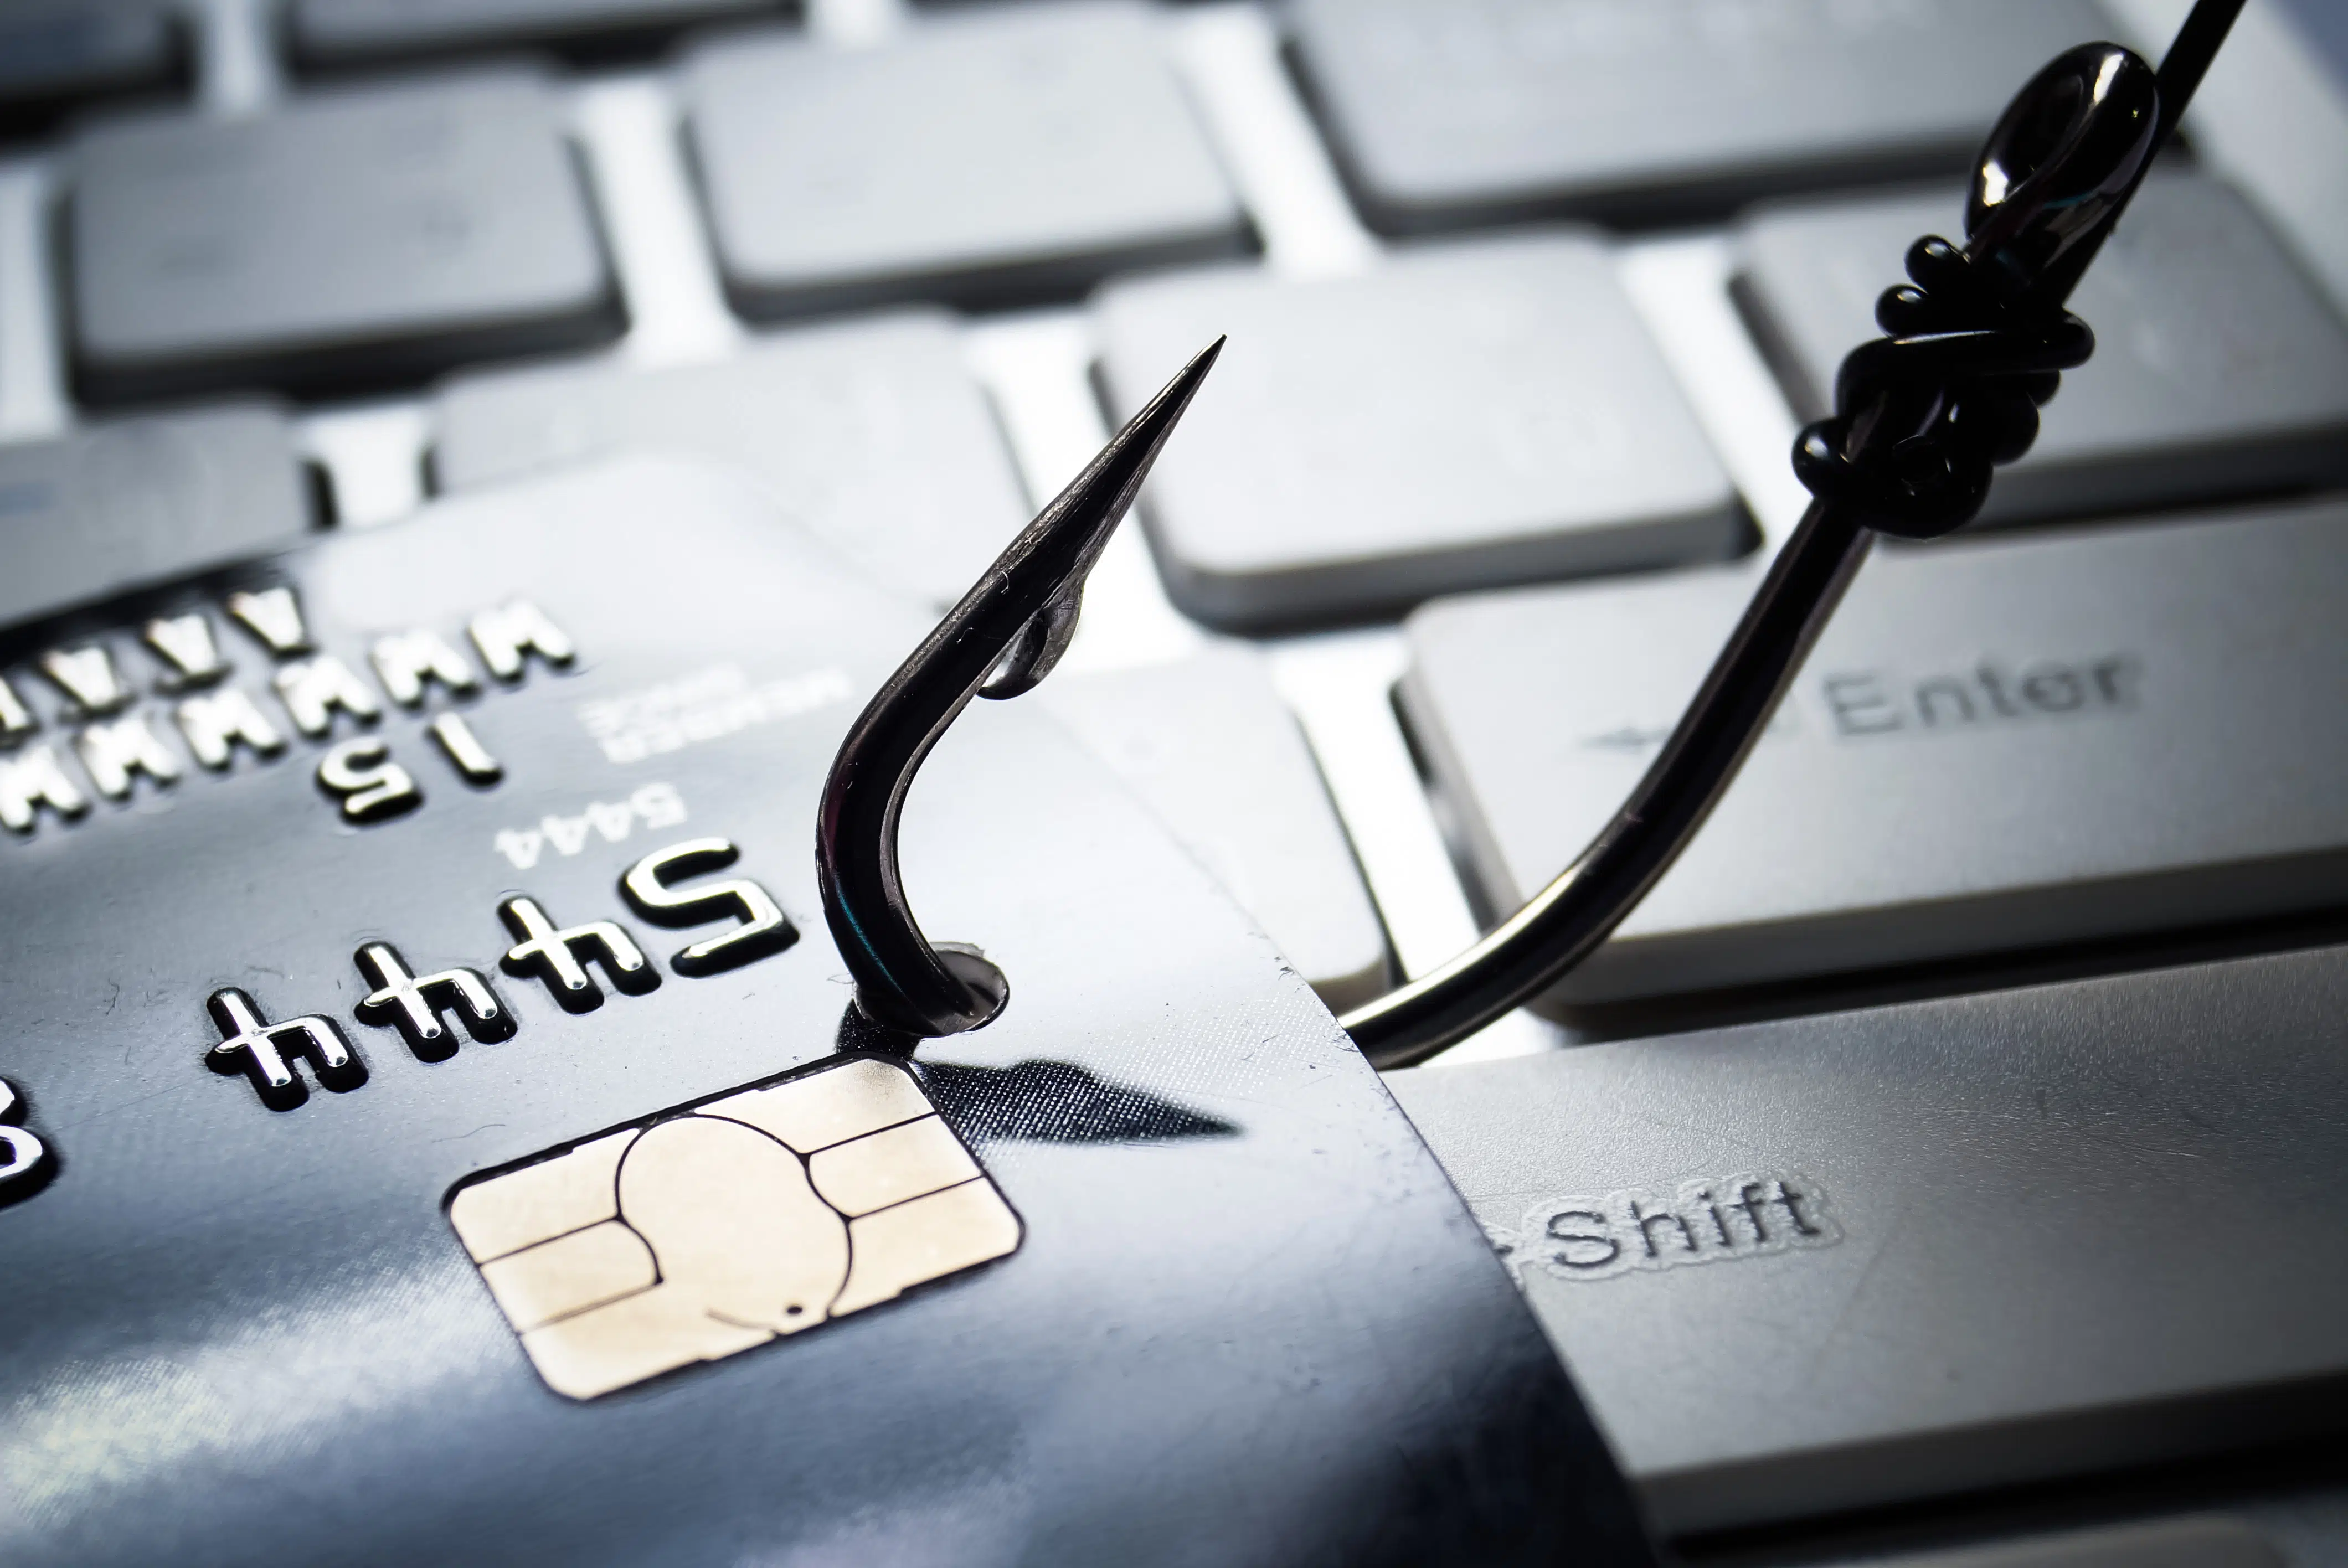 Credit Card Phishing Piles Of Credit Cards With A Fish Hook On